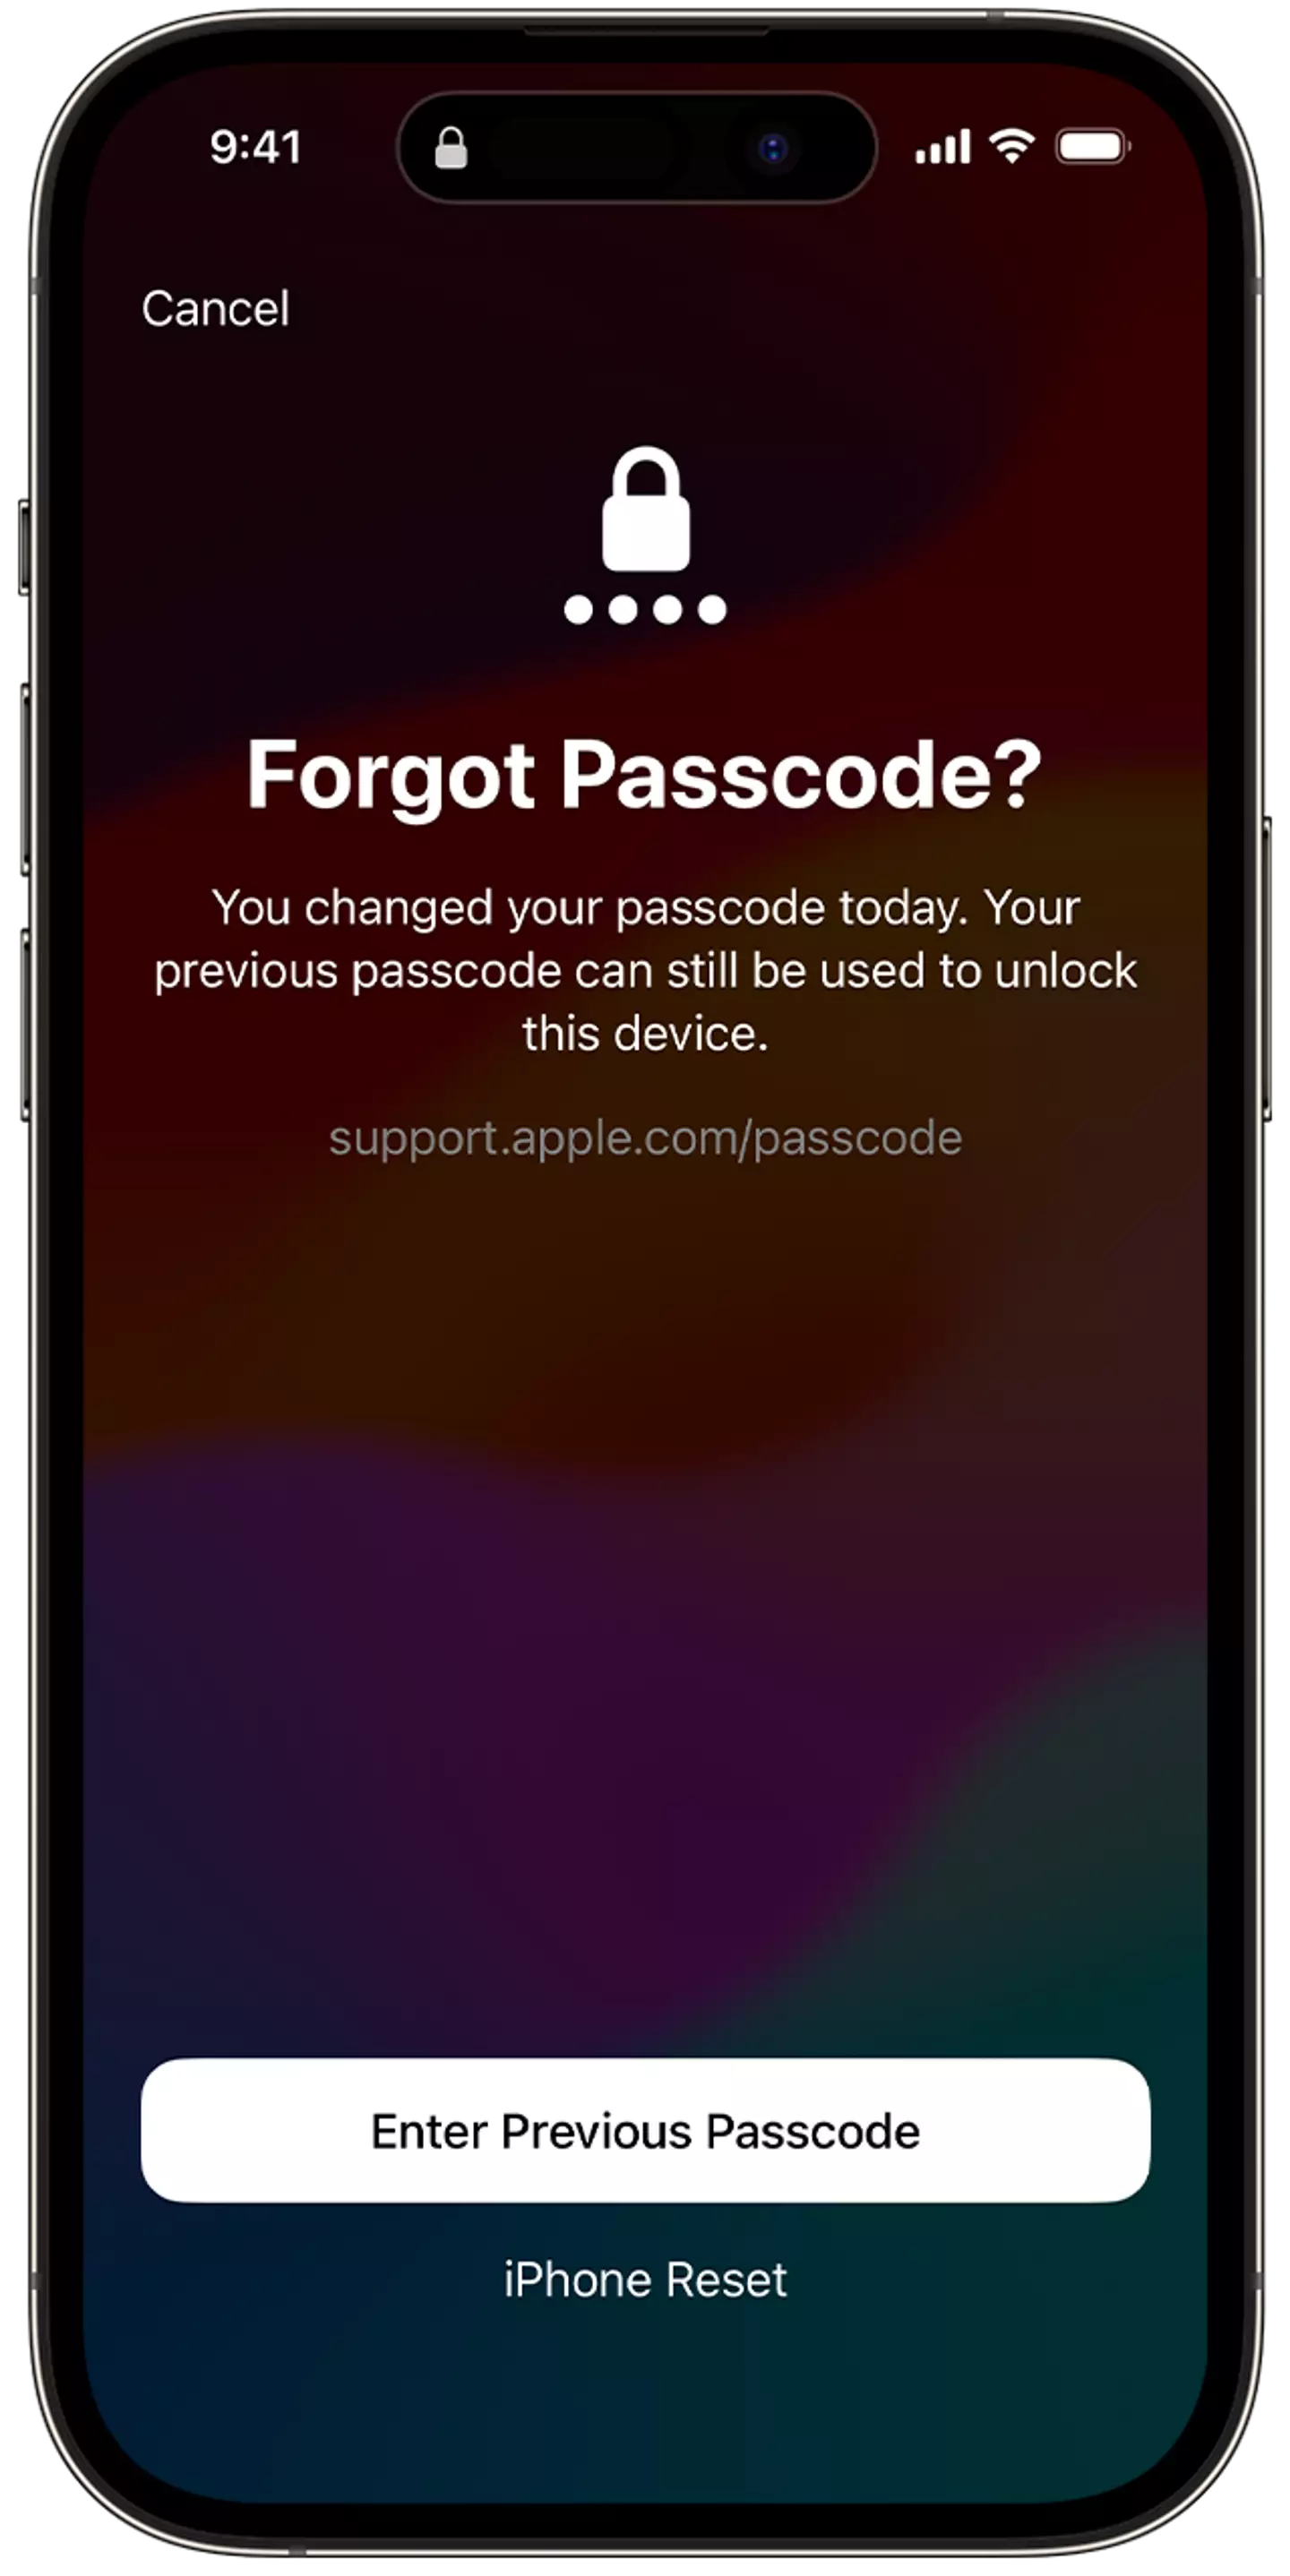 The 'Passcode Reset' feature has some security issues.